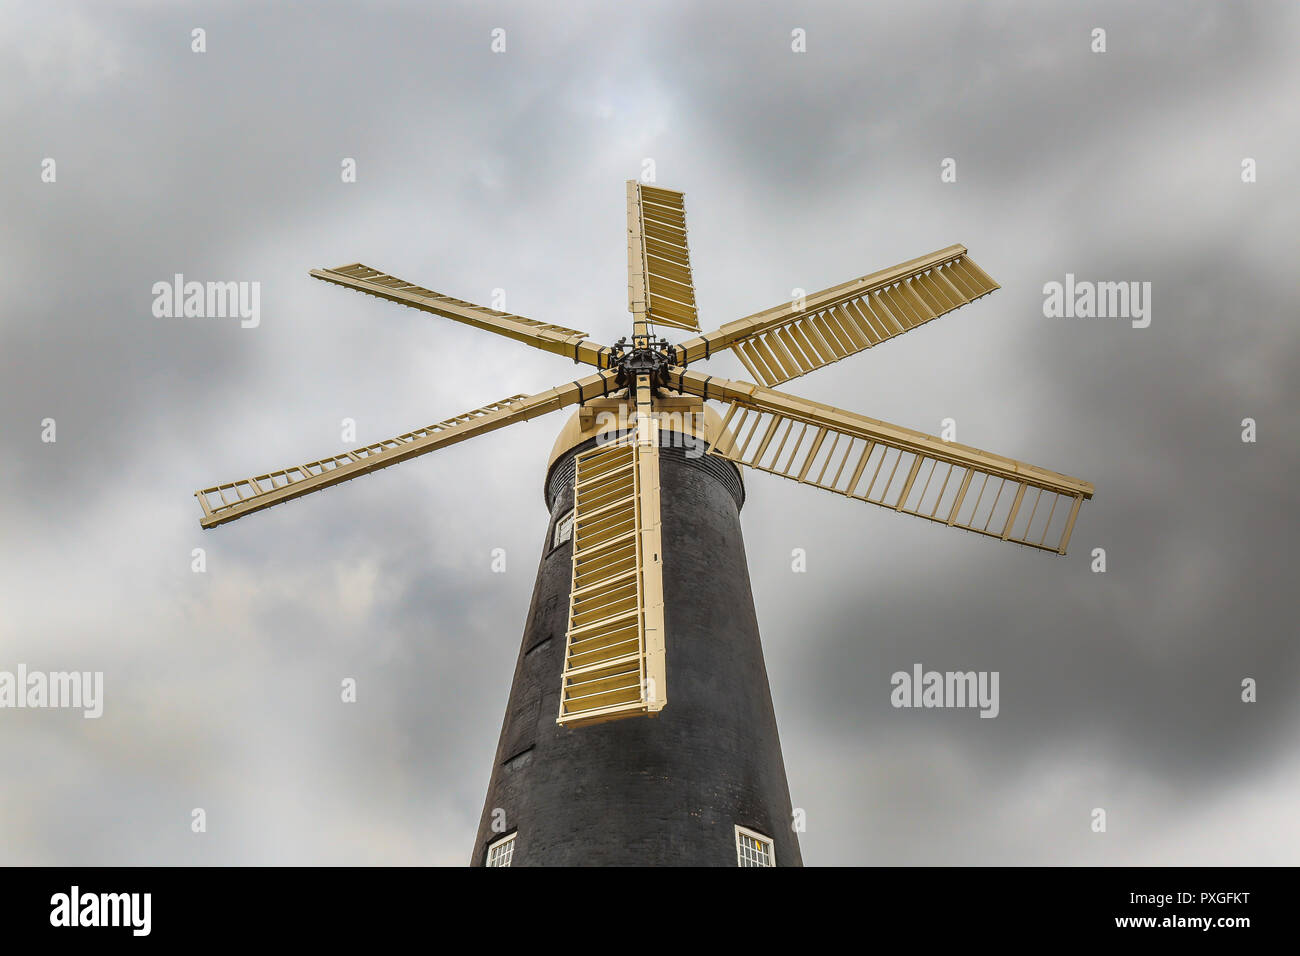 Isolated, six-sailed UK windmill from low-angle viewpoint. Worm's-eye view looking up at windmill blades from below, with dramatic cloudy sky. Stock Photo